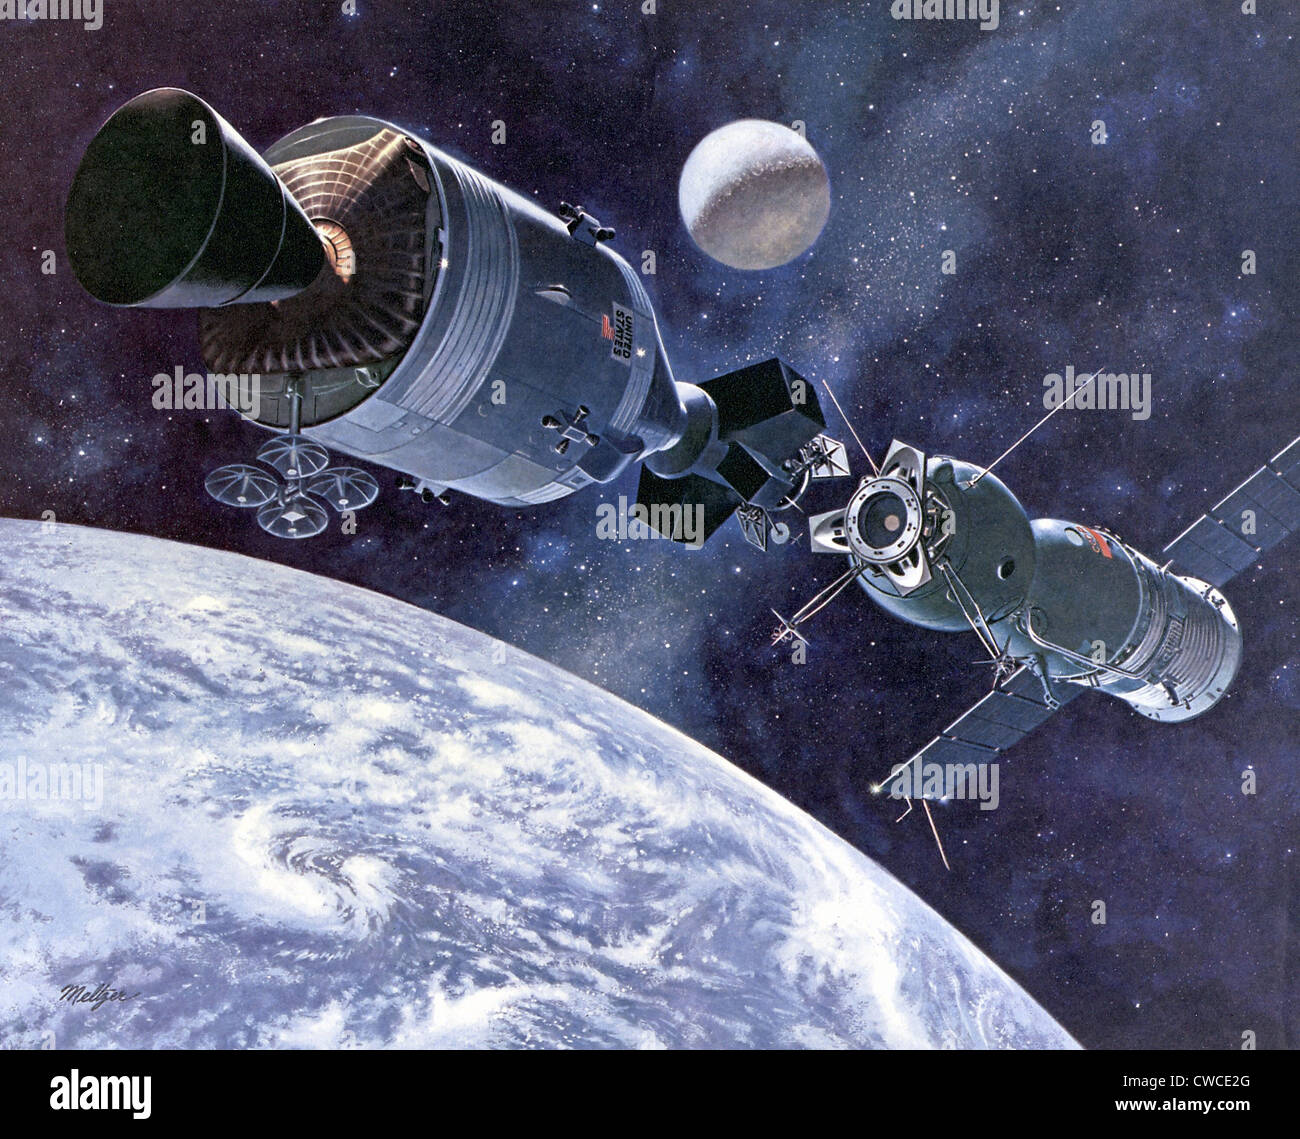 Painting of Apollo-Soyuz Test Project, the first international docking of the US's Apollo capsule and the USSR's Soyuz Stock Photo